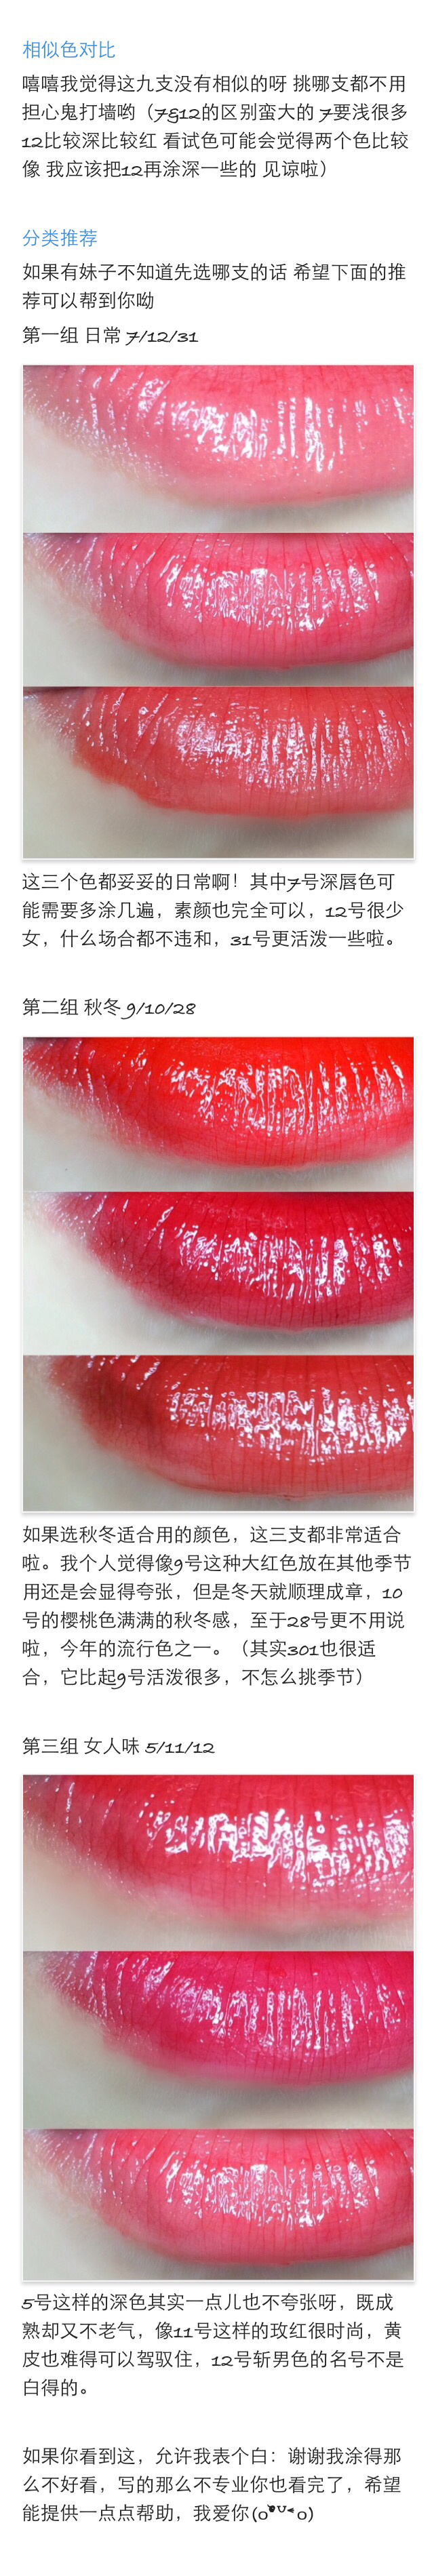 YSL ROUGE PUR COUTURE GLOSS STAIN 缎面镜光唇釉5/7/9/10/11/12/28/31/301试色合集